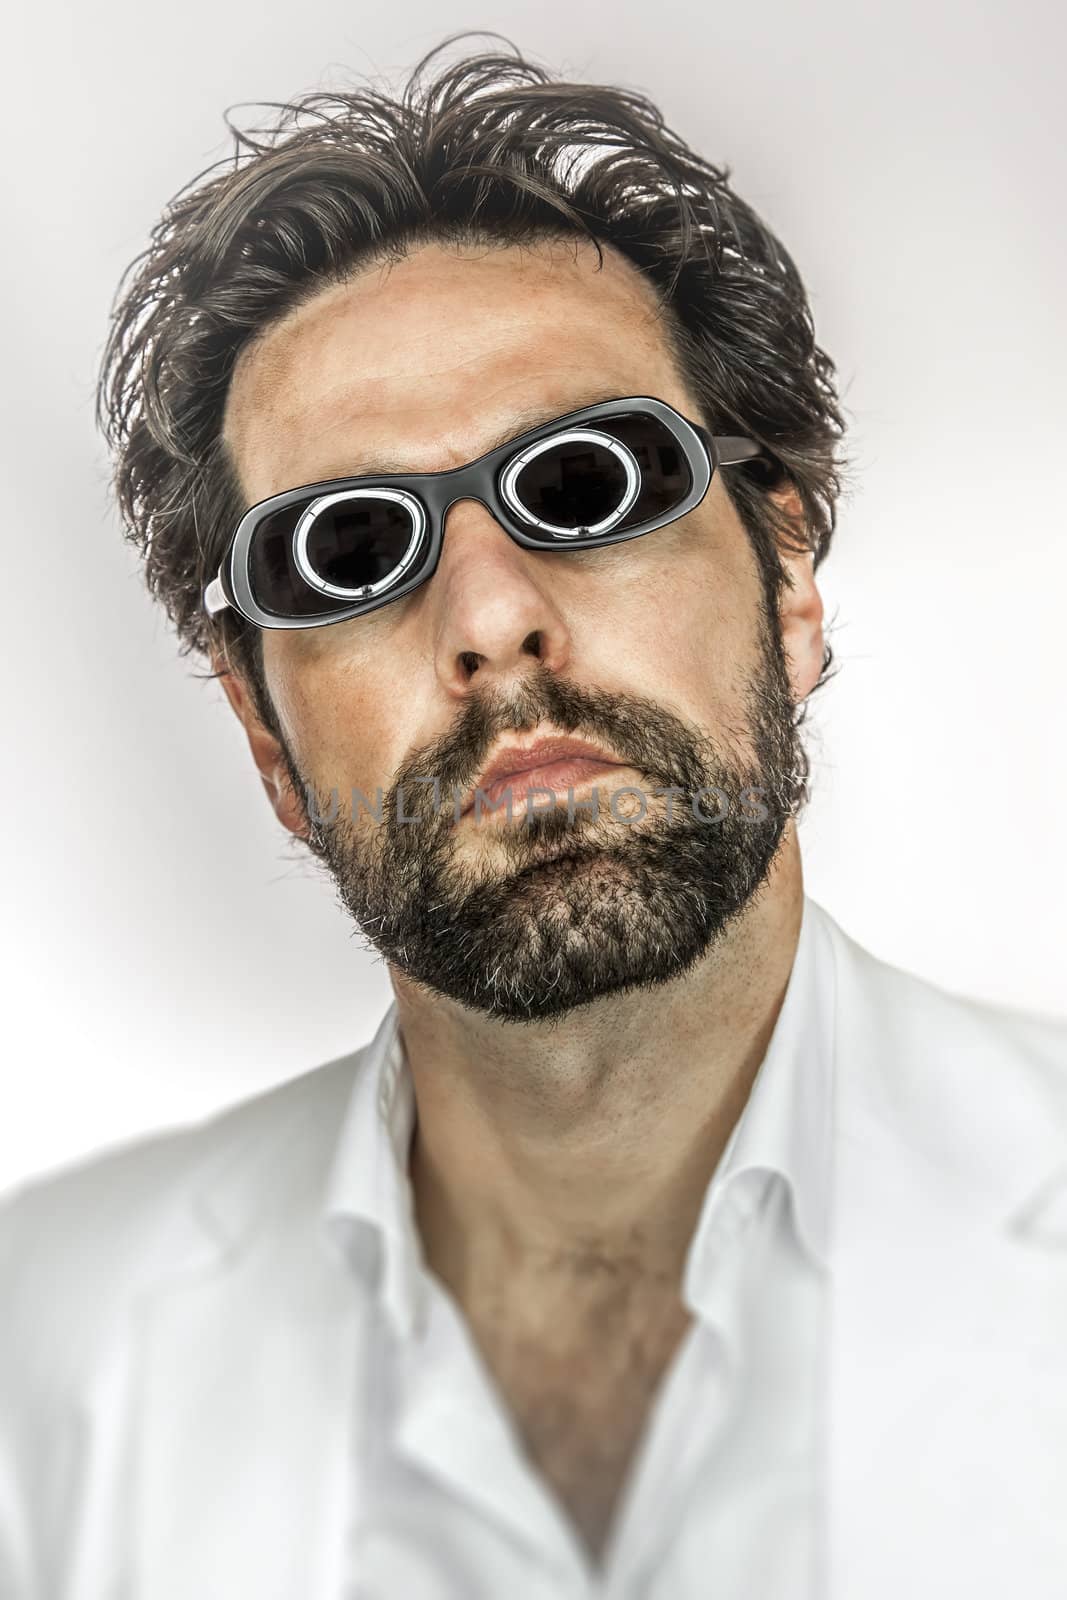 An image of a man with cool sun glasses